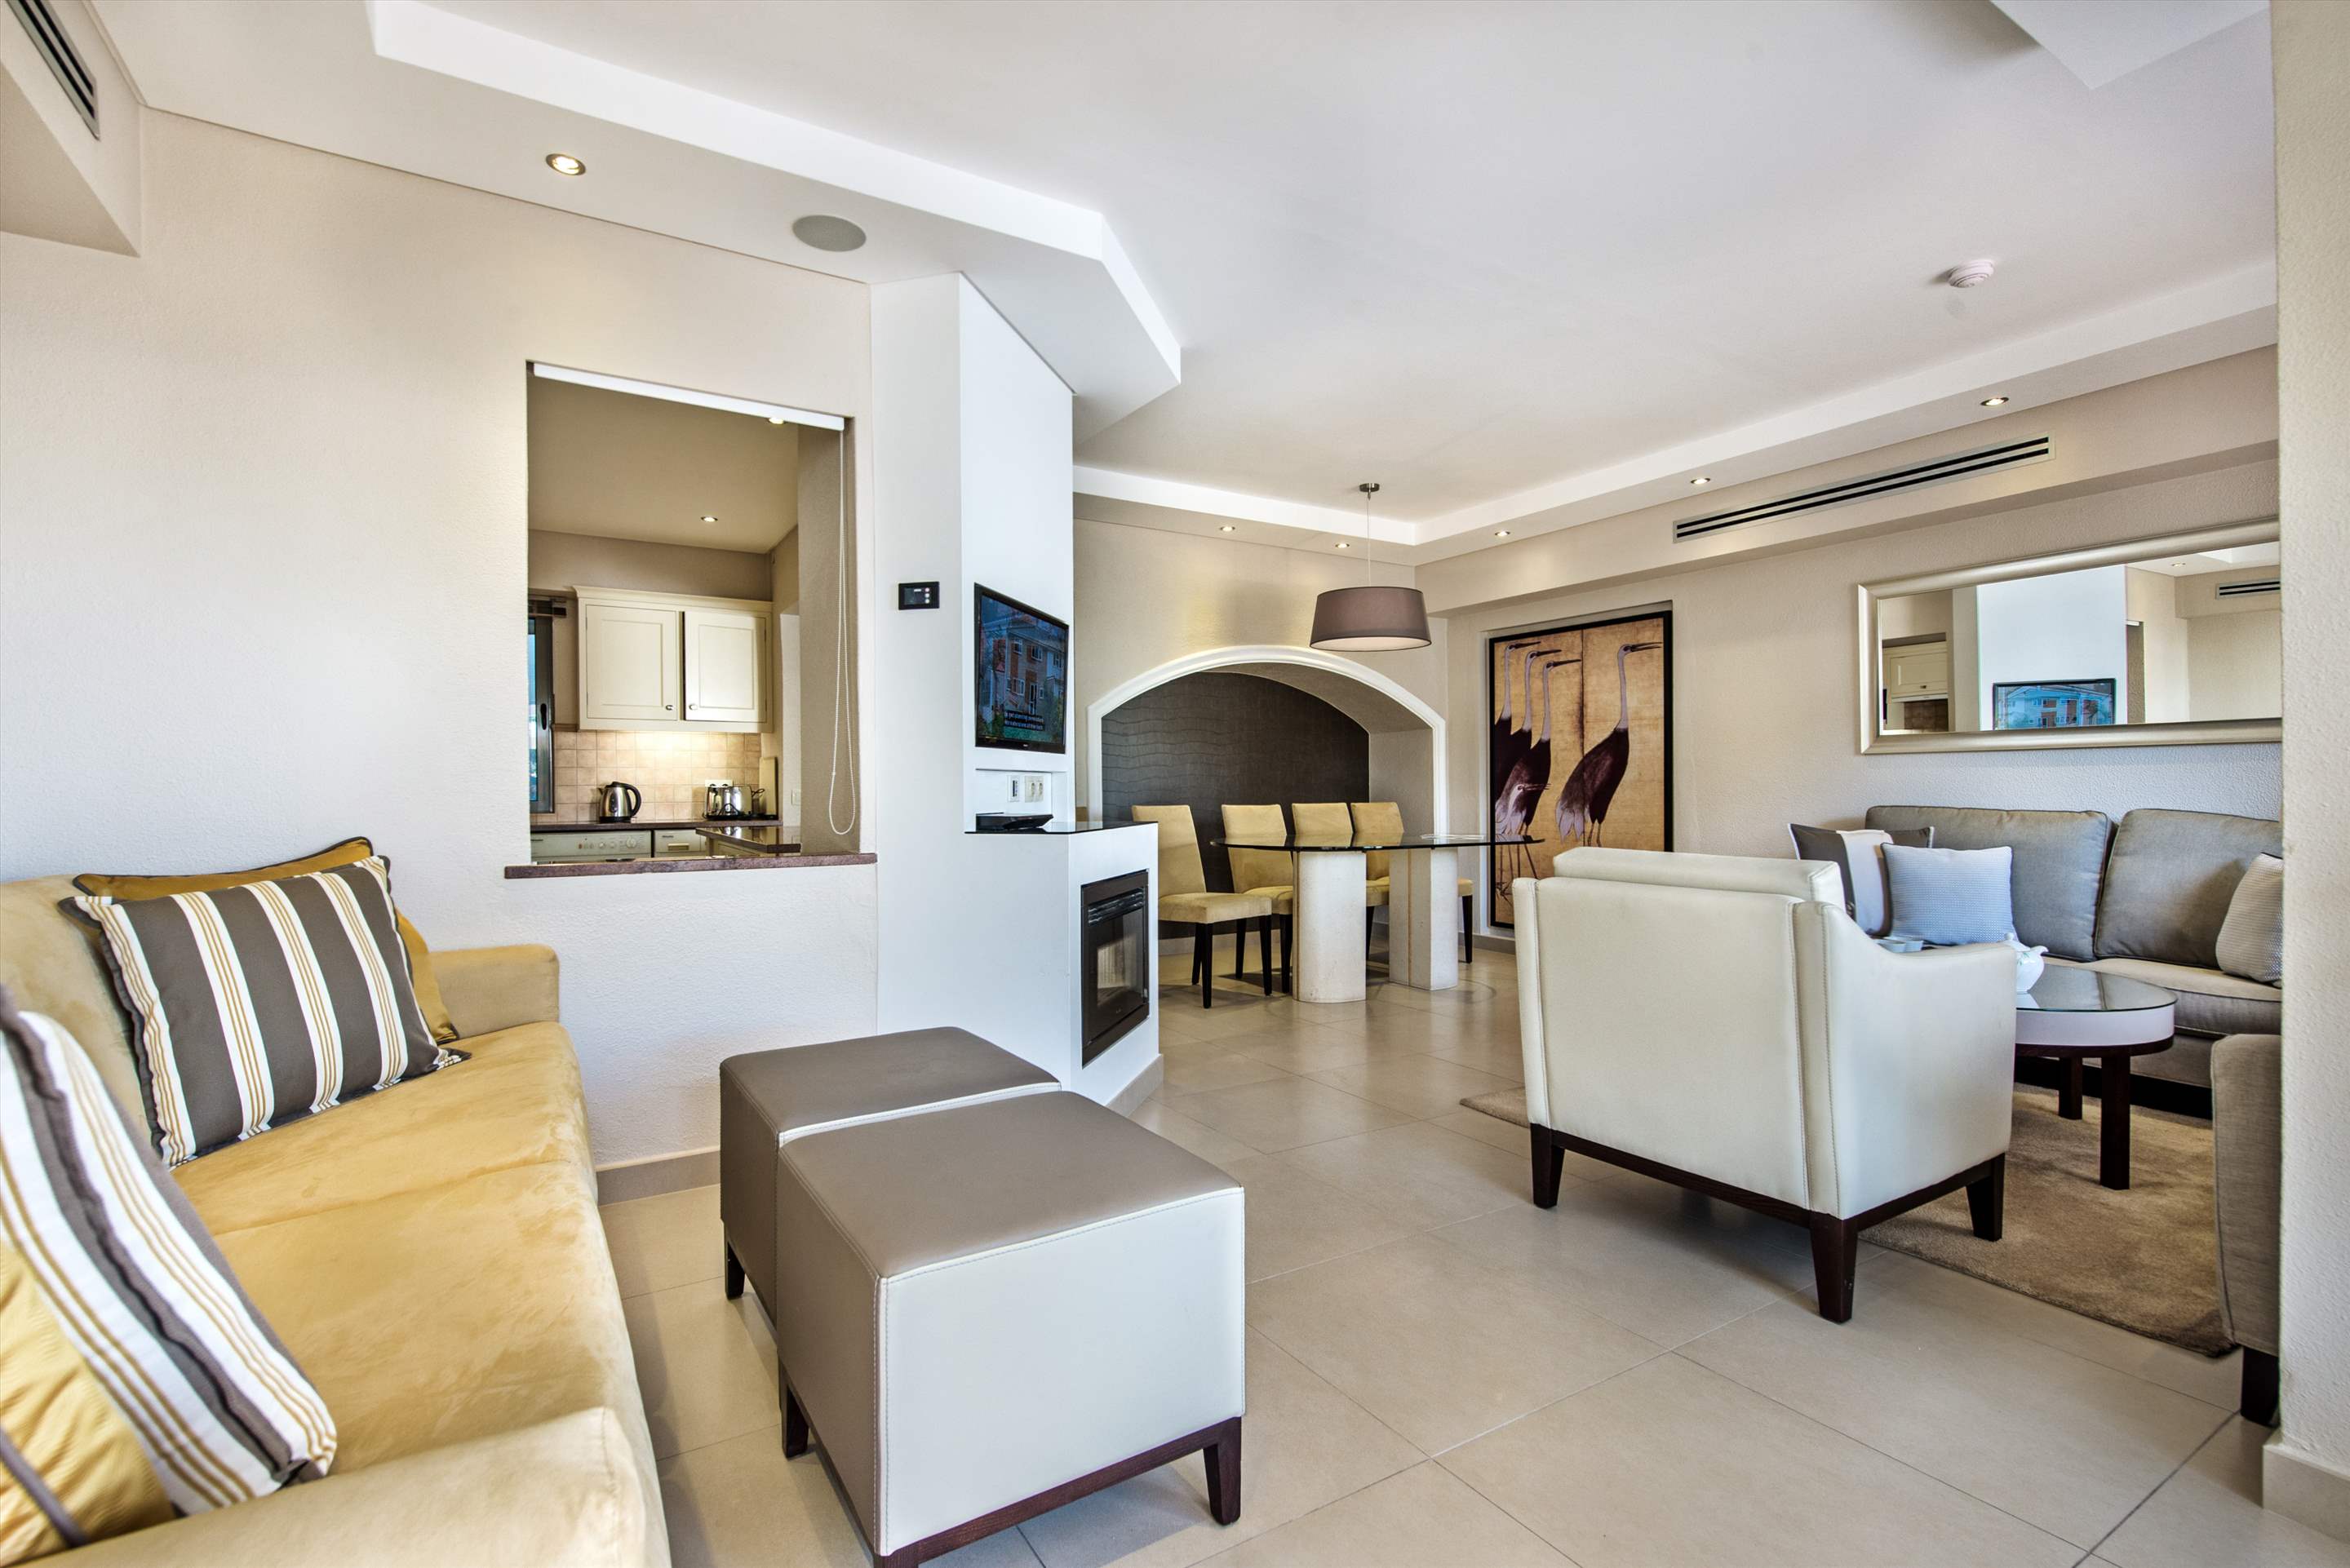 Four Seasons Country Club 1 bed, Superior - Thursday Arrival, 1 bedroom apartment in Four Seasons Country Club, Algarve Photo #4